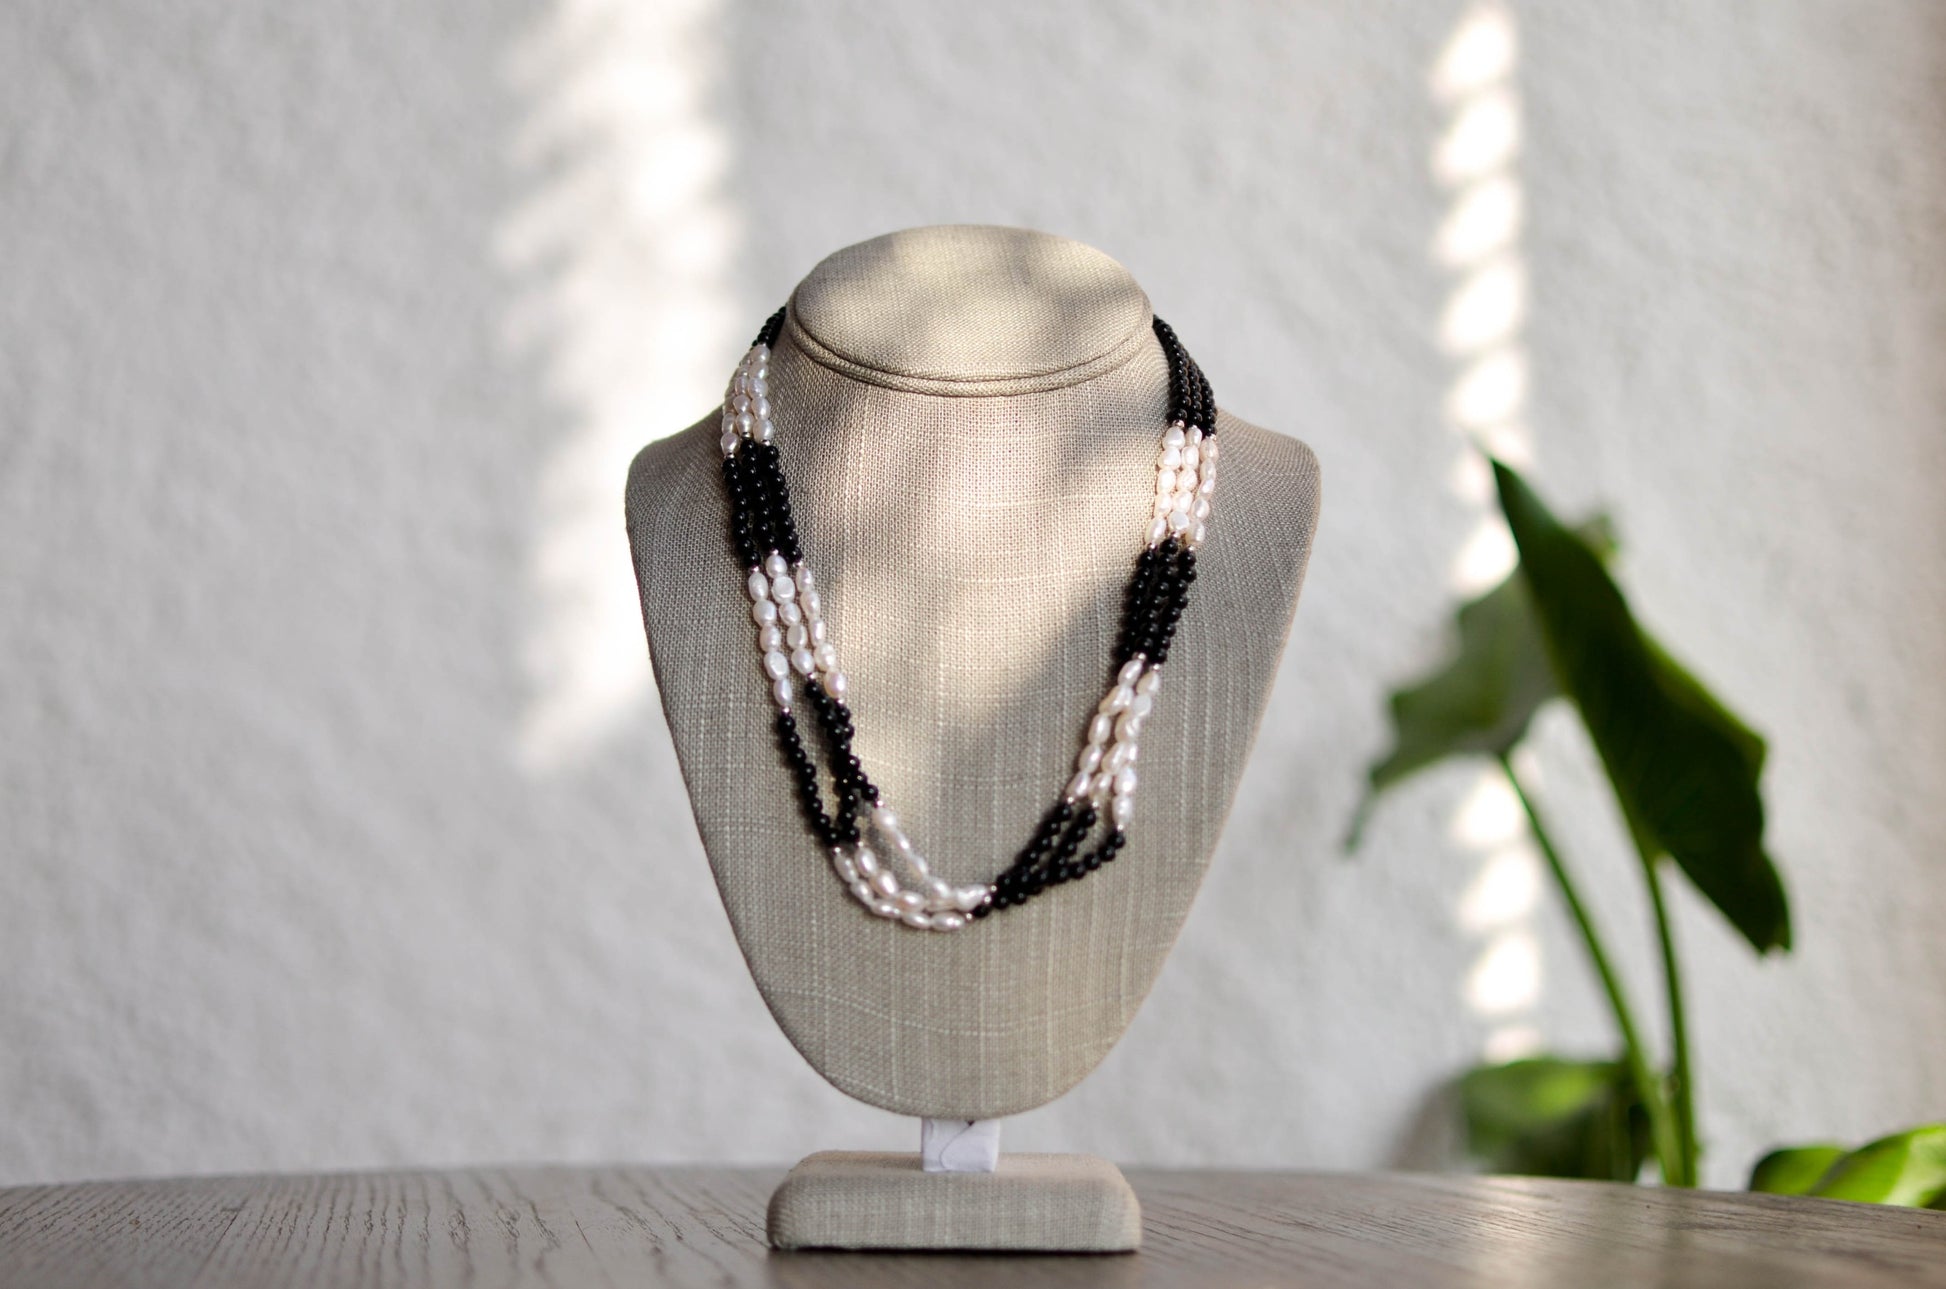 Triple Strand Pearl Necklace with Onyx - Pearls4Girls